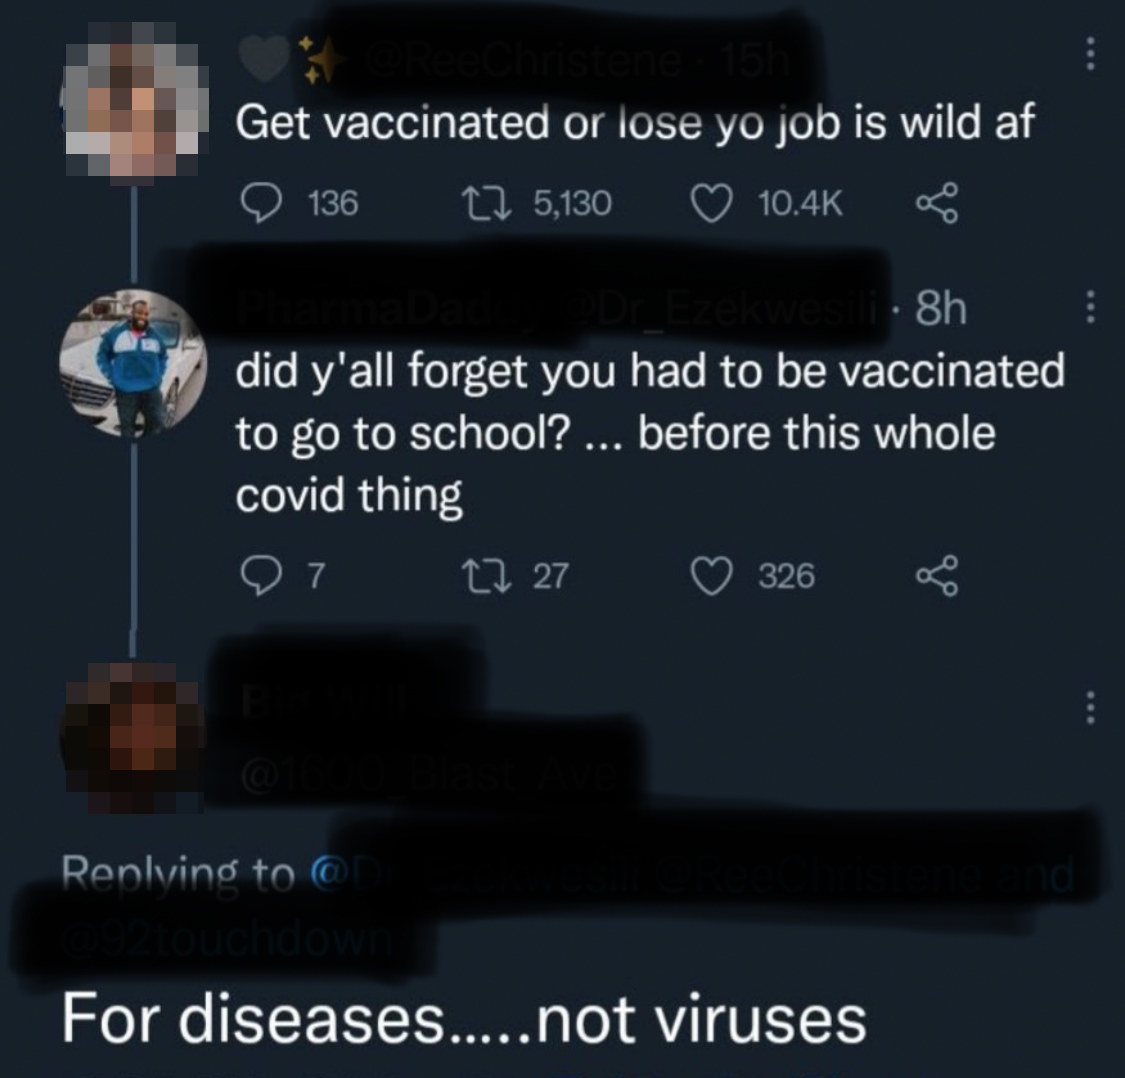 Person who says diseases and viruses are different things after someone asks if they forgot you had to be vaccinated to go to school